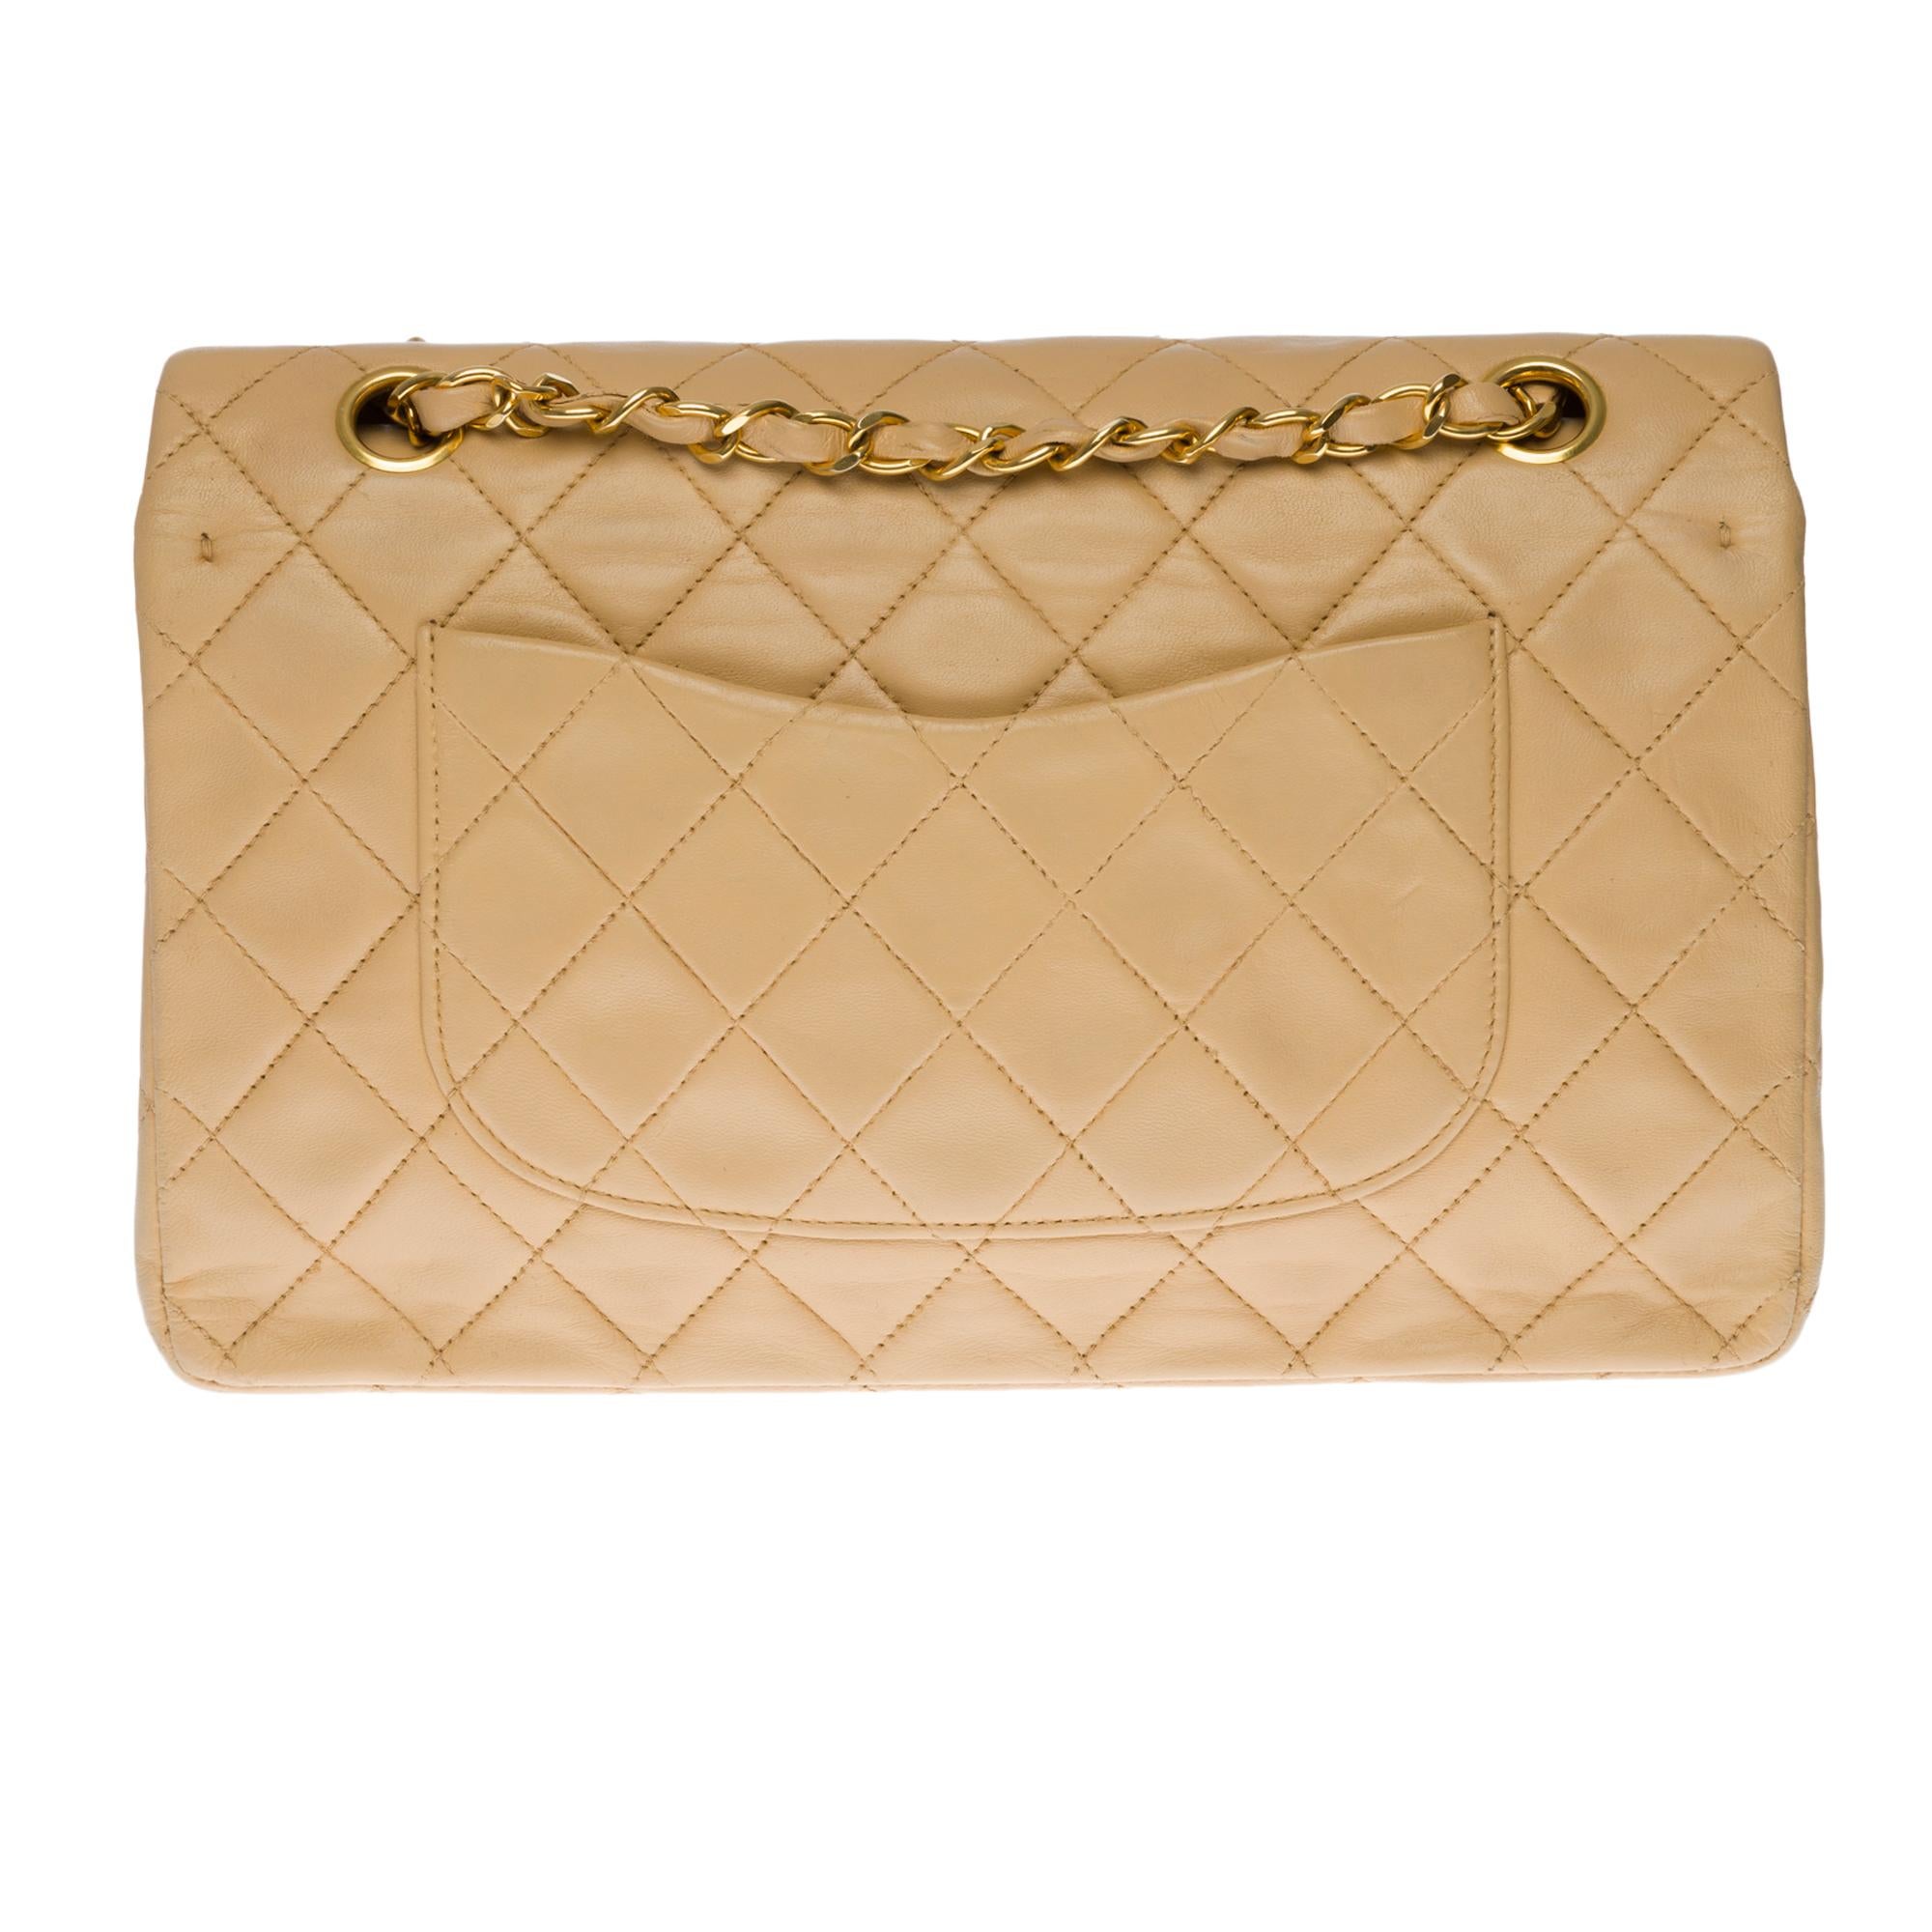 Beautiful Chanel Timeless/Classique medium size shoulder bag with double flap in beige quilted lambskin leather, gold-tone metal hardware, a gold-tone metal chain handle intertwined with beige leather allowing a hand, shoulder and crossbody